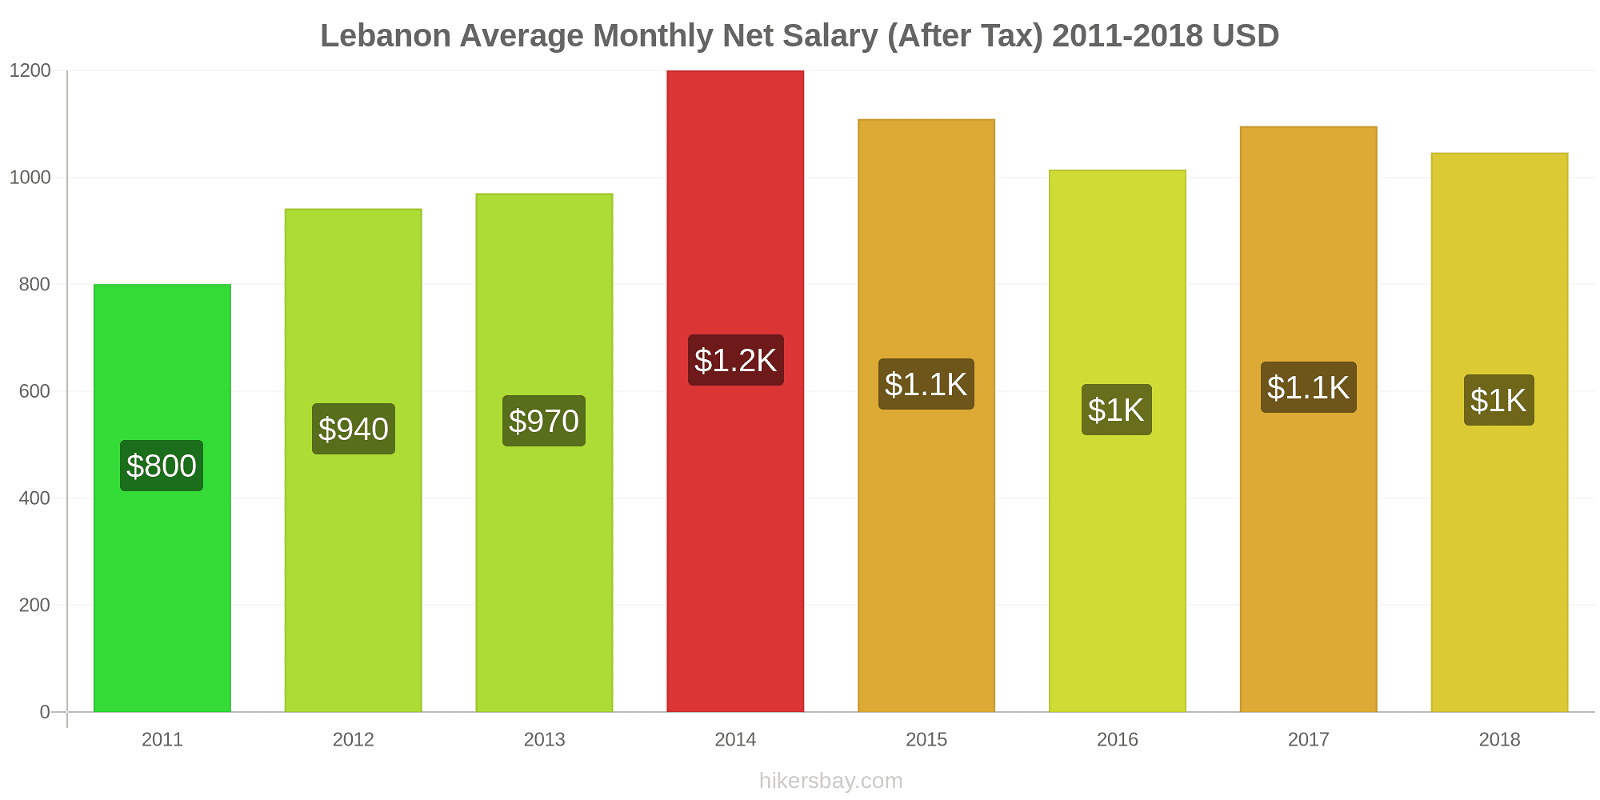 Lebanon price changes Average Monthly Net Salary (After Tax) hikersbay.com